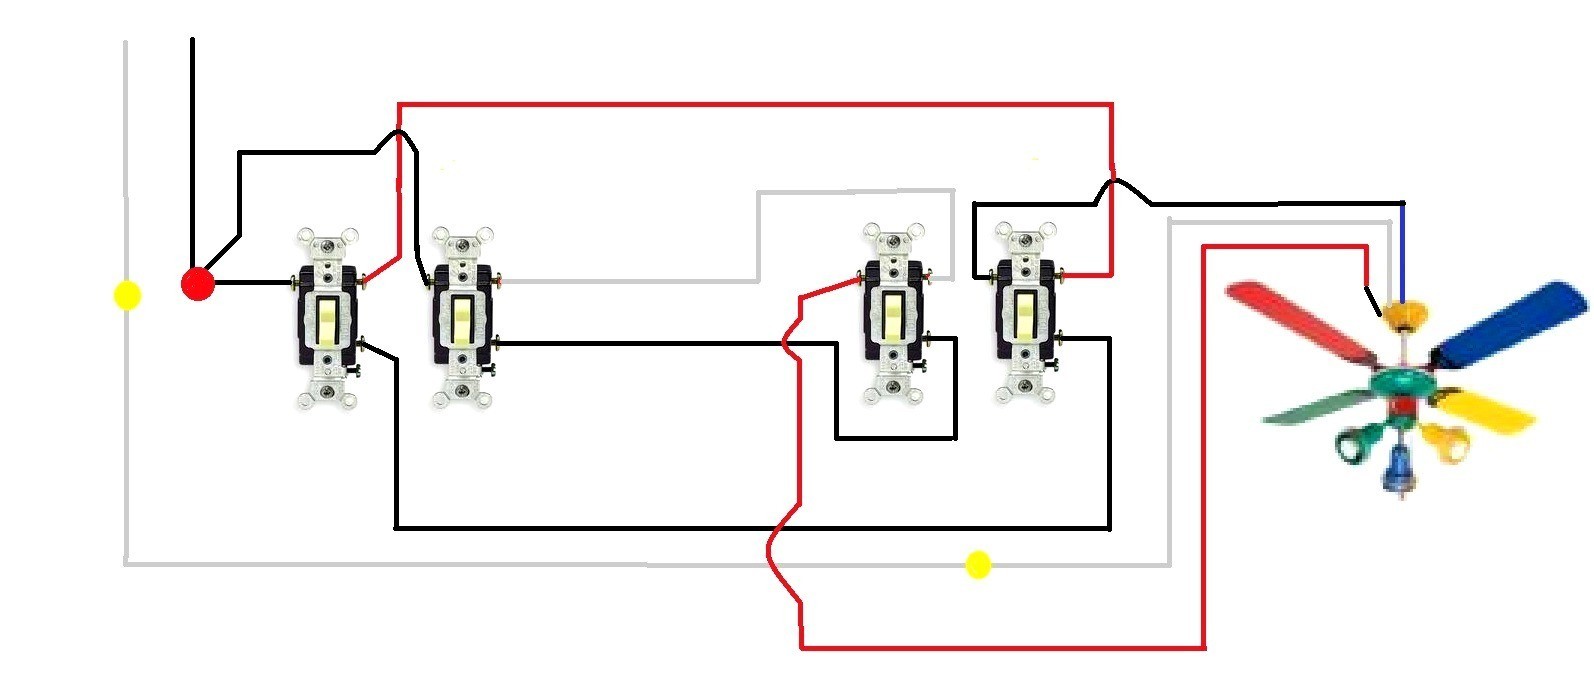 4 Way Switch Wiring Diagrams Unique Fan Wiring Diagram Inspirational Wiring Diagram Ceiling Fan Light 3